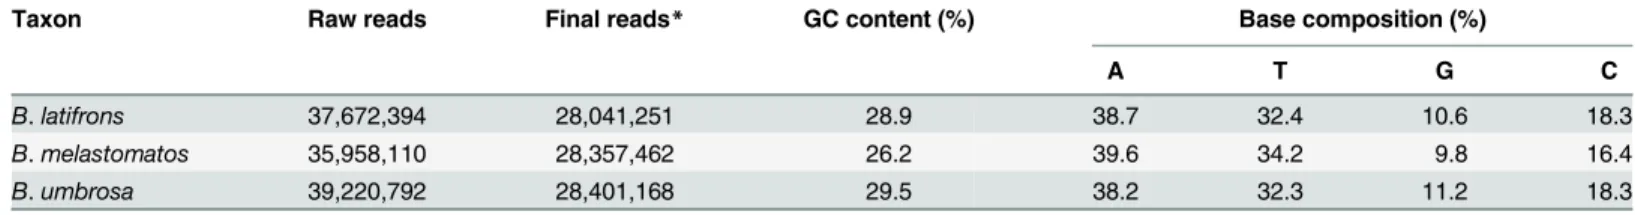 Table 2. Number of reads, GC content and base composition of Bactrocera mitogenomes produced by next-generation sequencing.